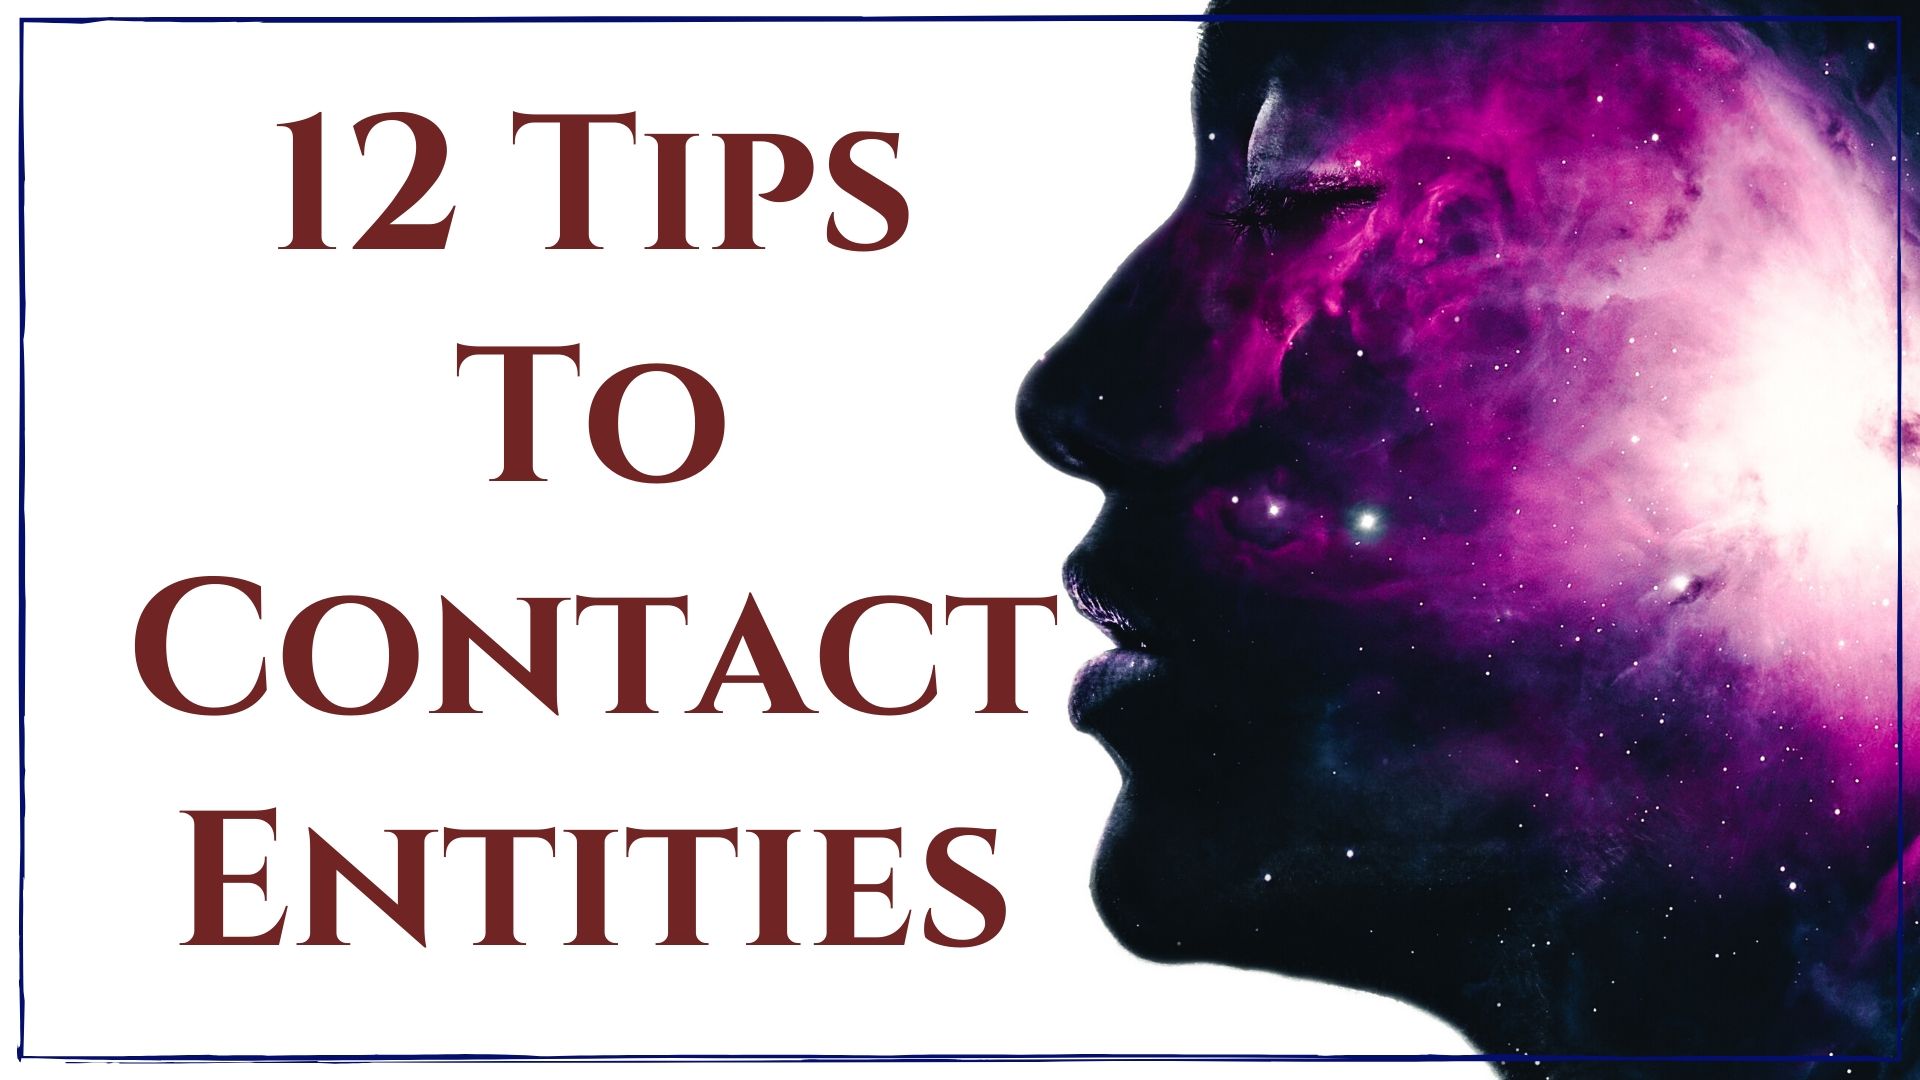 12 tips to contact entities